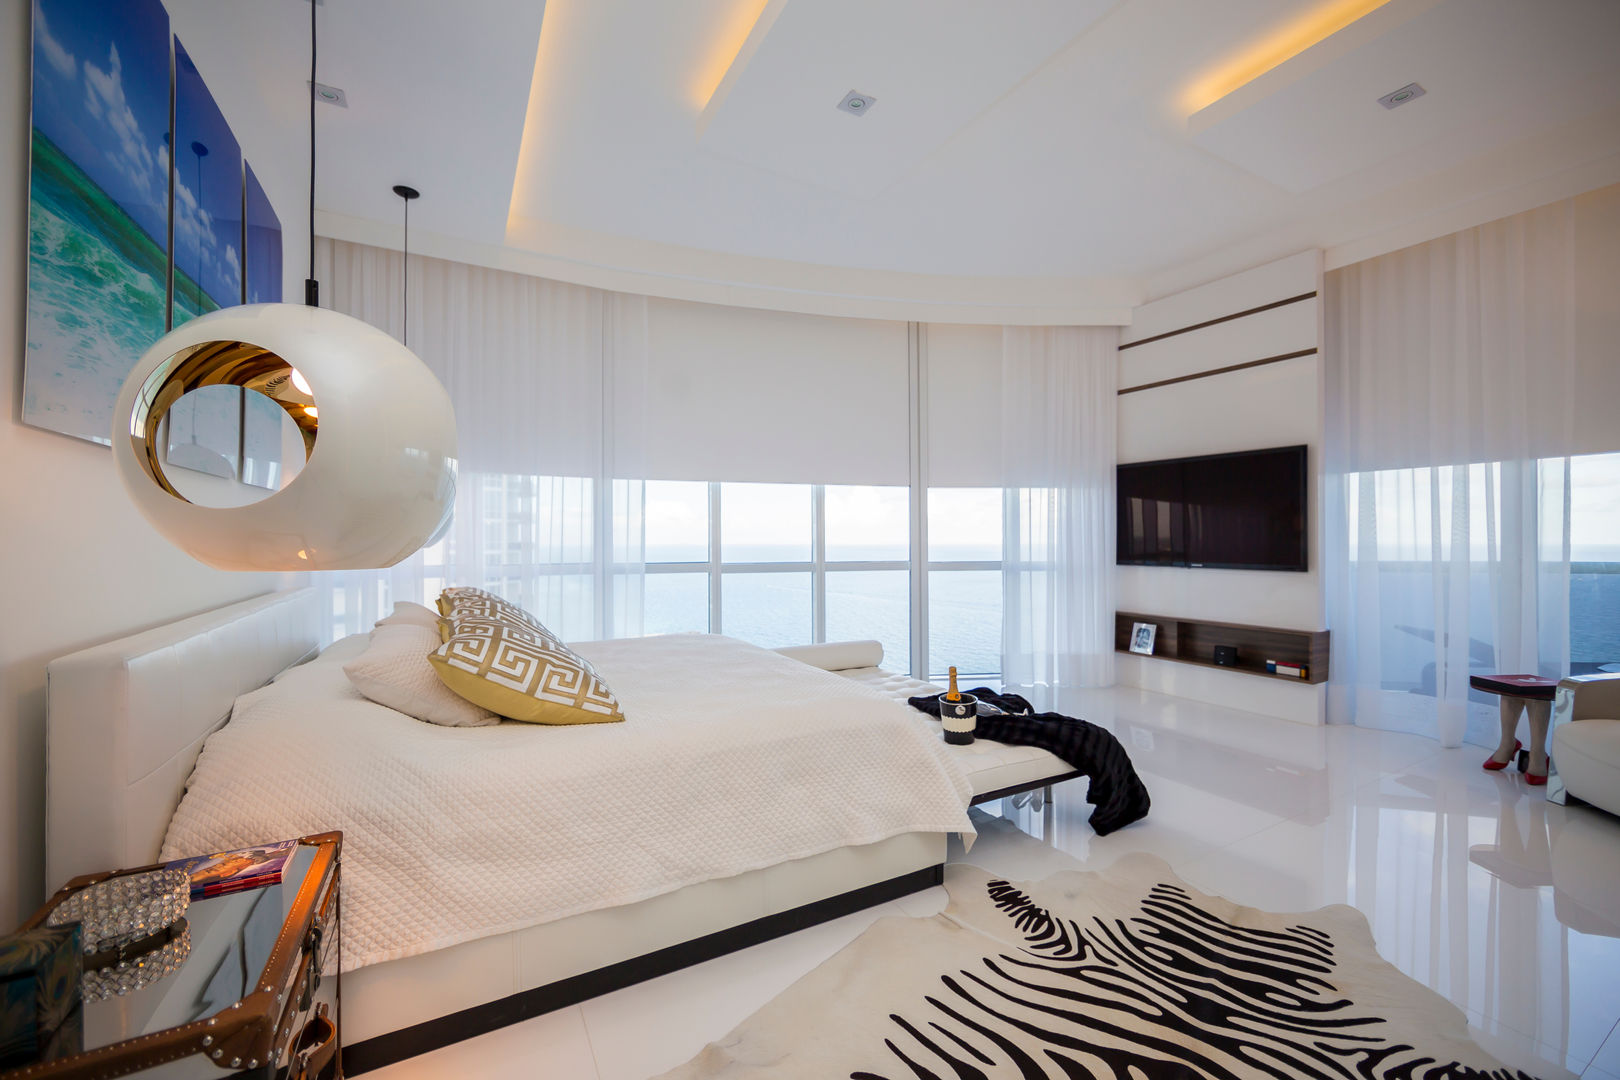 Sunny Isles - Florida - US, Infinity Spaces Infinity Spaces Bedroom